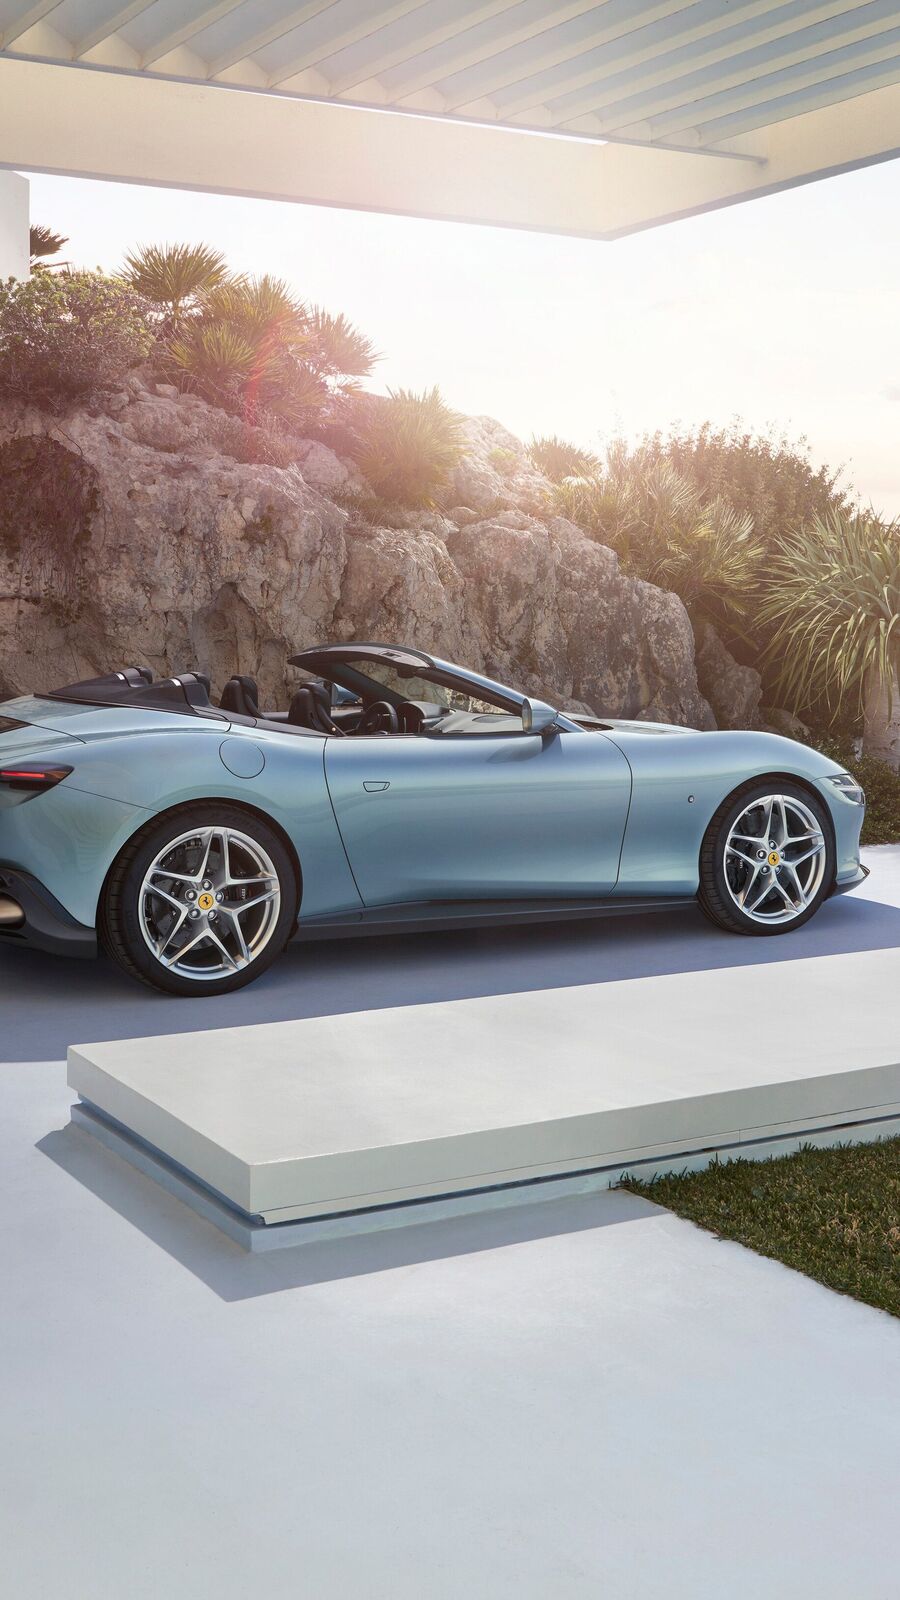 Ferrari vows stronger 2023 with more new models, including its